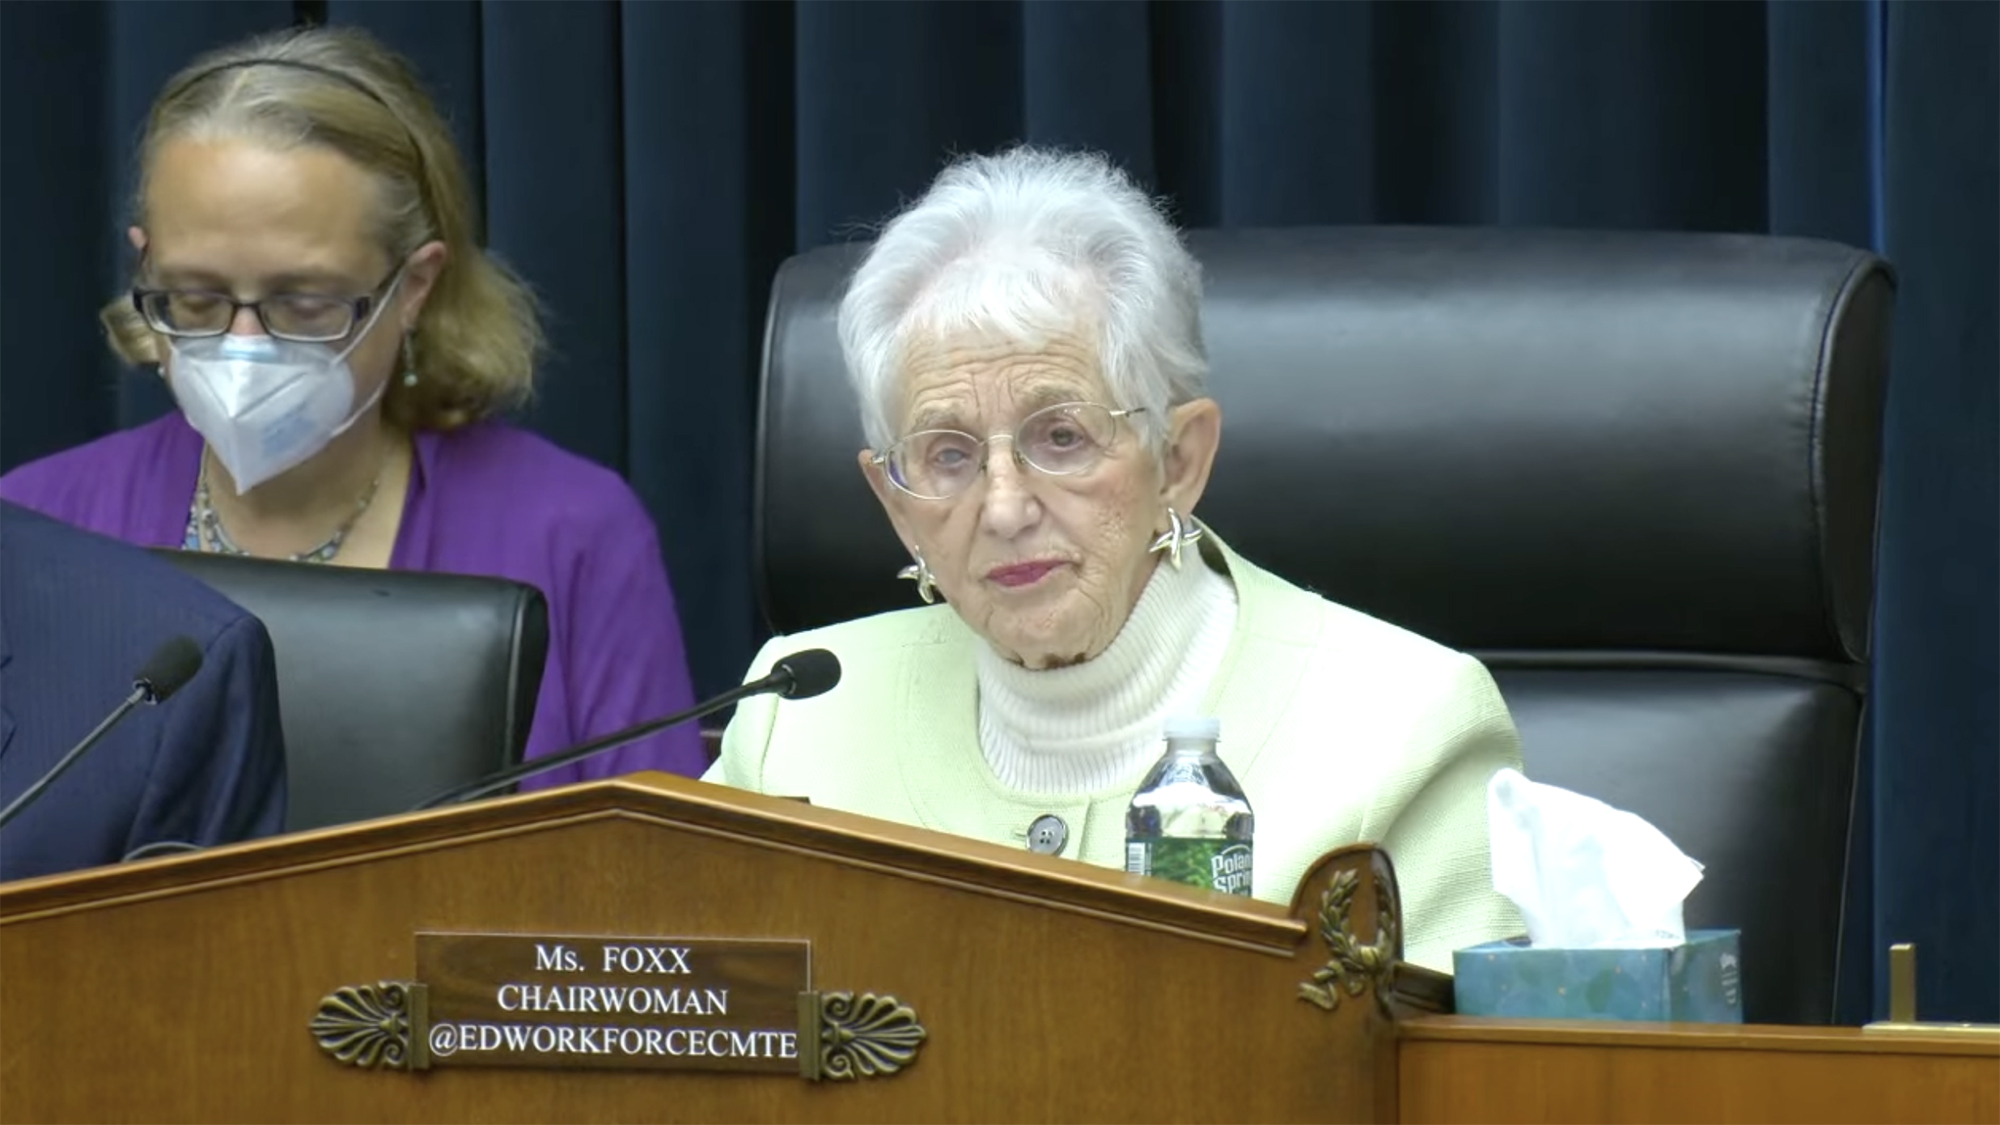 House Education Committee Chairwoman Rep. Virginia Foxx during opening remarks at a "Columbia in Crisis: Columbia University's Response to Antisemitism" hearing today in Washington, DC.